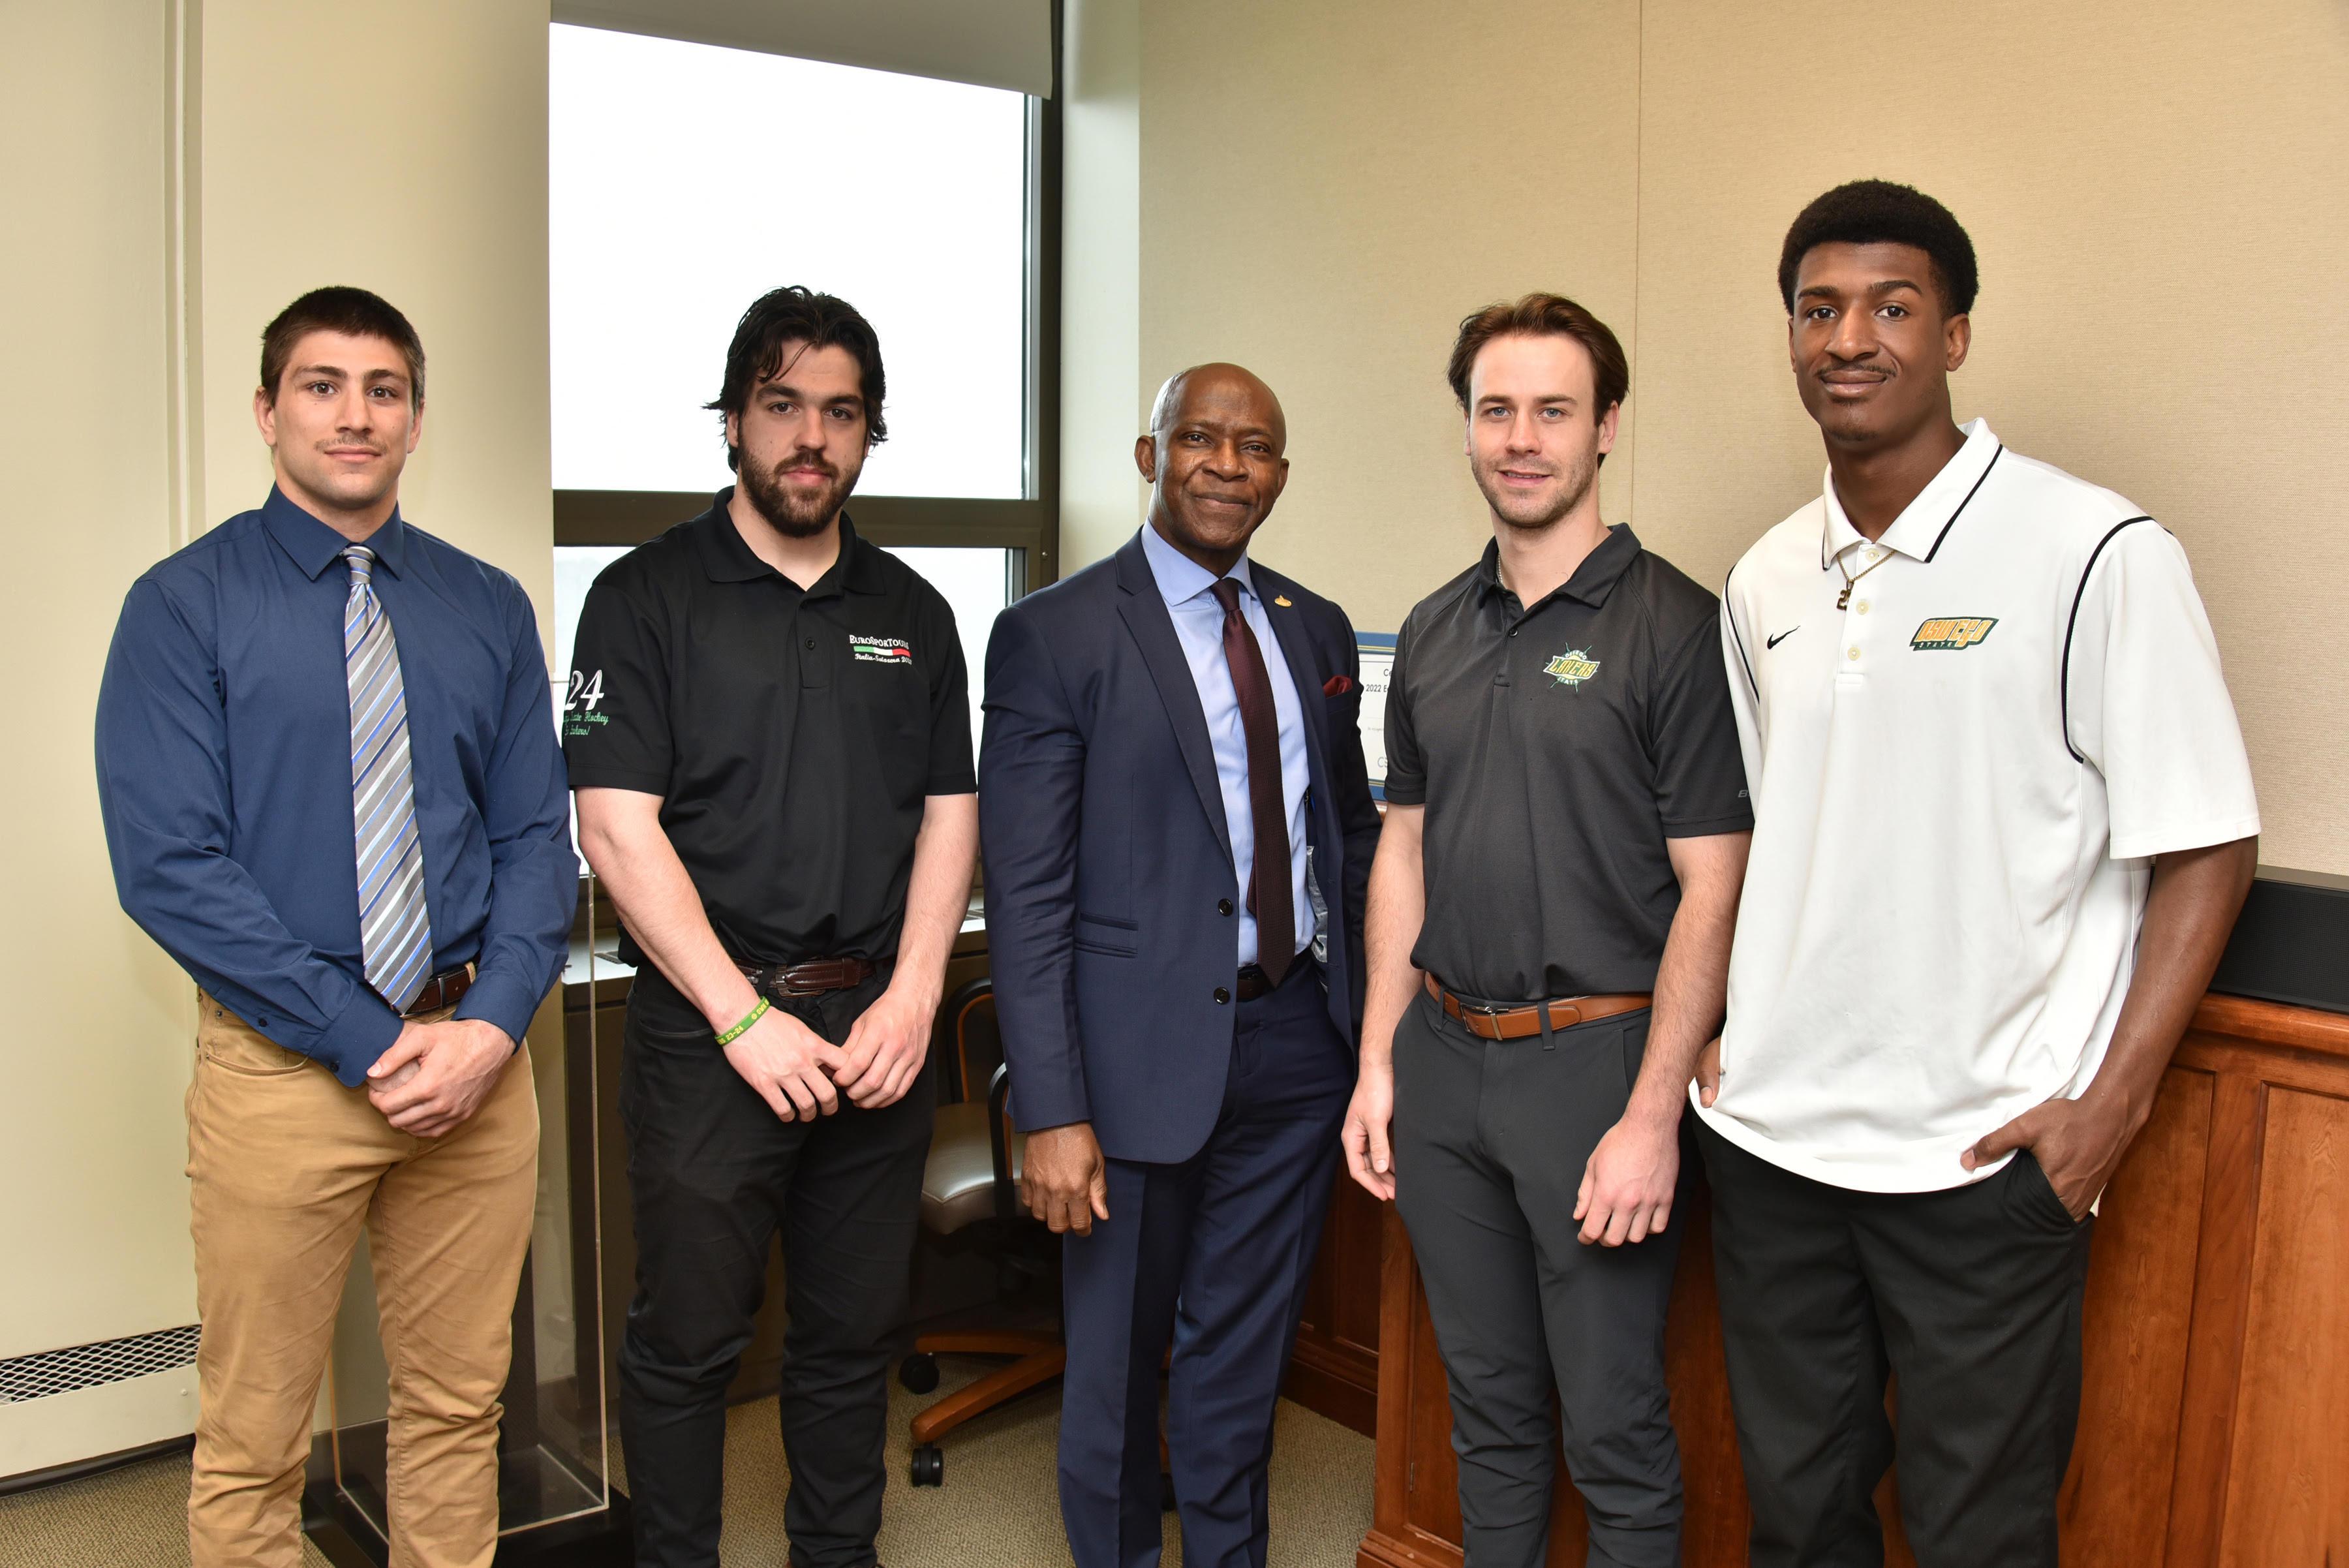 Four Laker student-athletes recently earned All-American recognition: With President Peter O. Nwosu (center) are, from left, Charlie Grygas, wrestling; Shane Bull, men's hockey; Tyler Flack, men's hockey; and Jeremiah Sparks, men's basketball